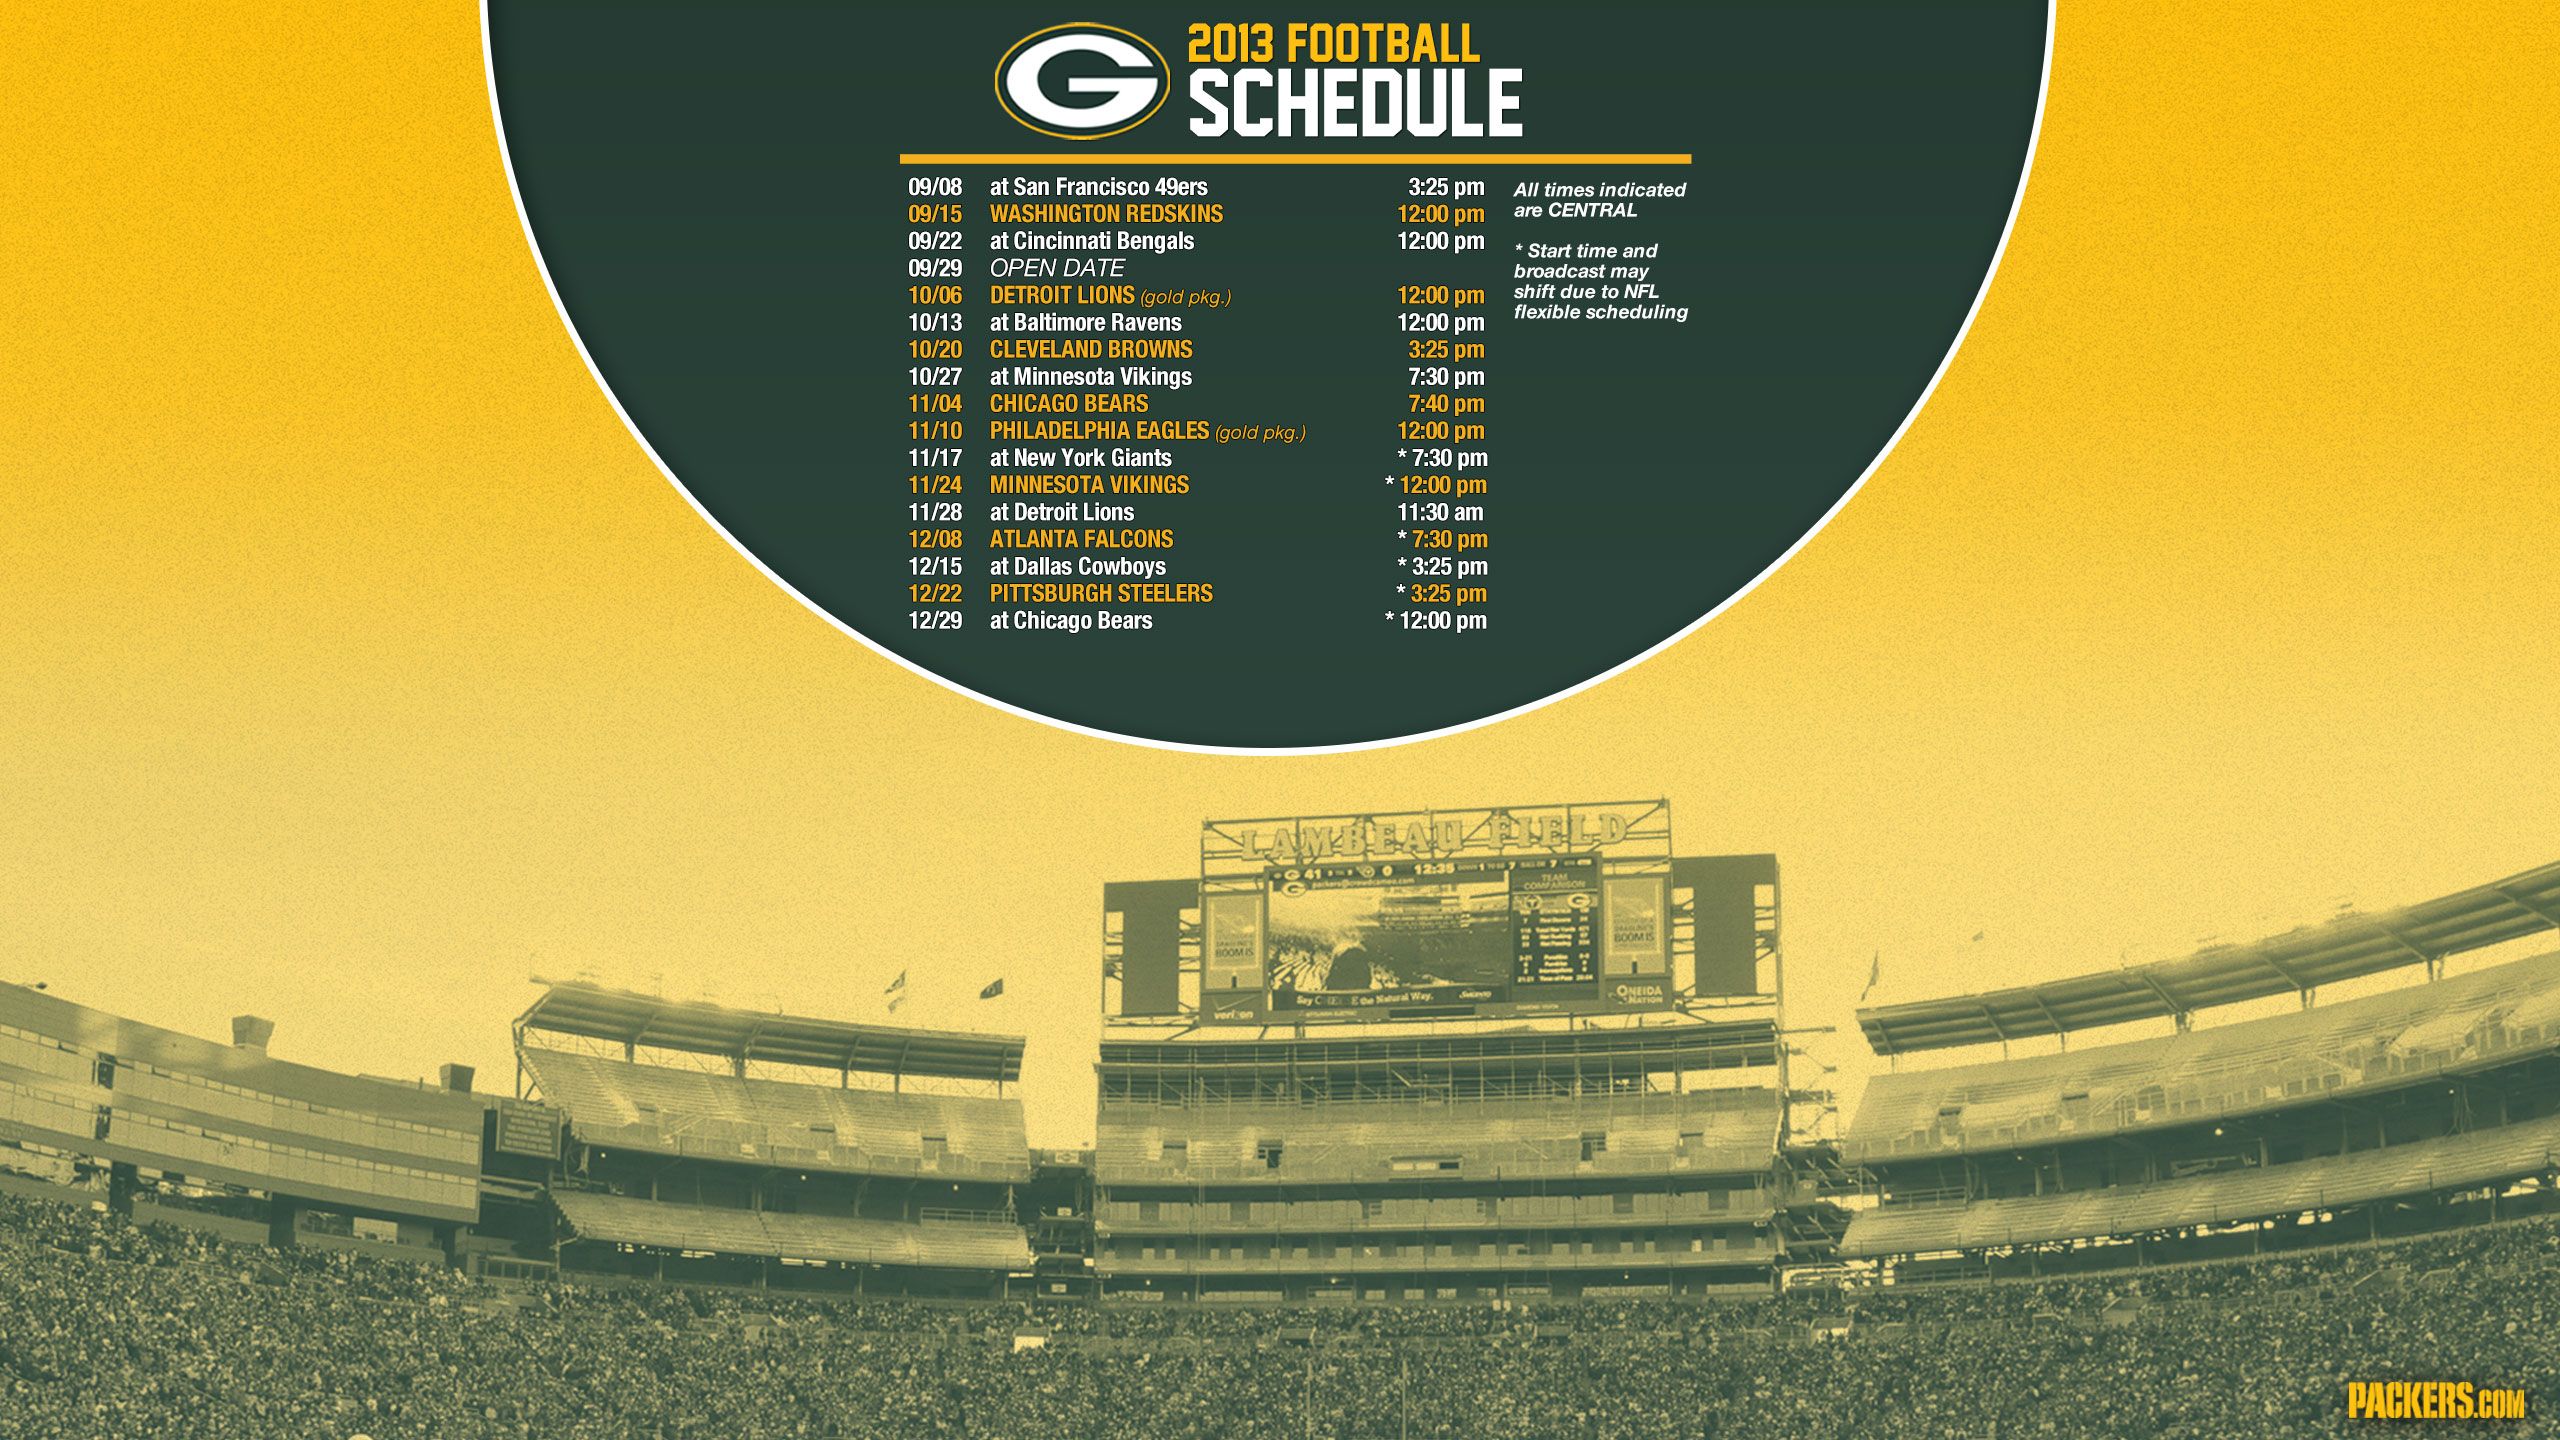 Packers.com | Wallpapers: 2013 Miscellaneous